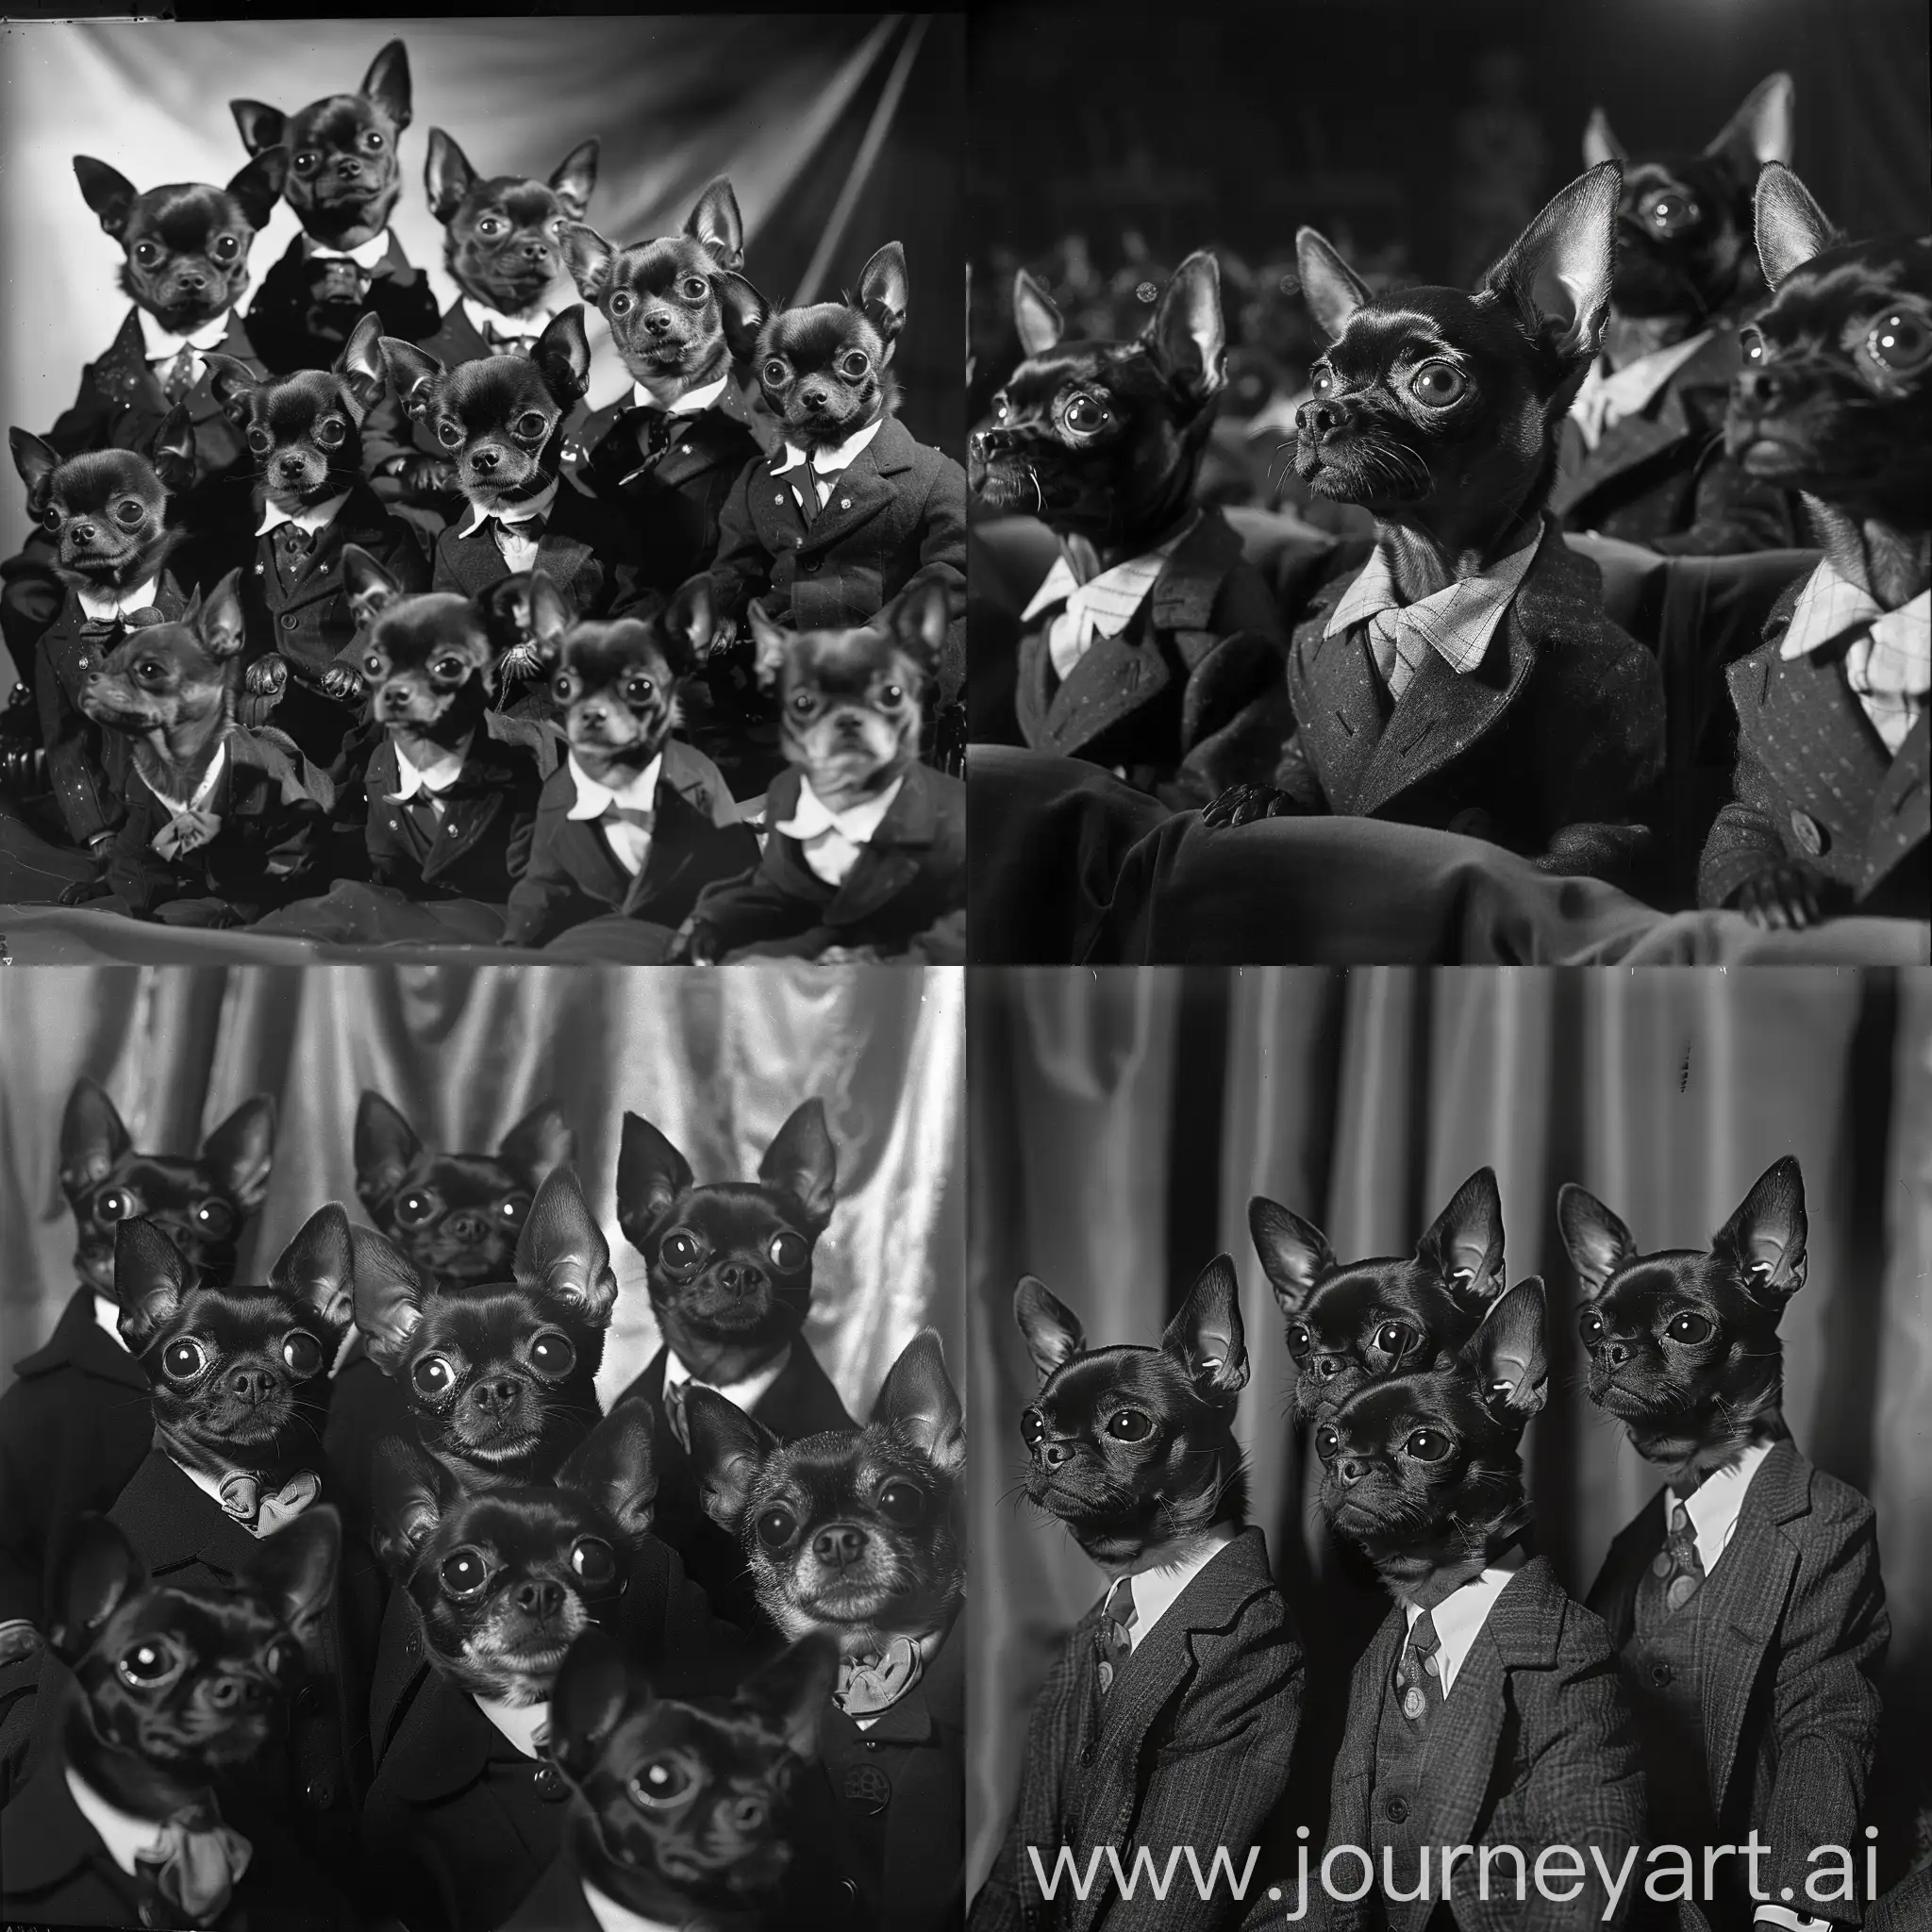 Dion-and-the-Belmonts-Performing-in-Monochrome-on-Planet-of-Black-Chihuahuas